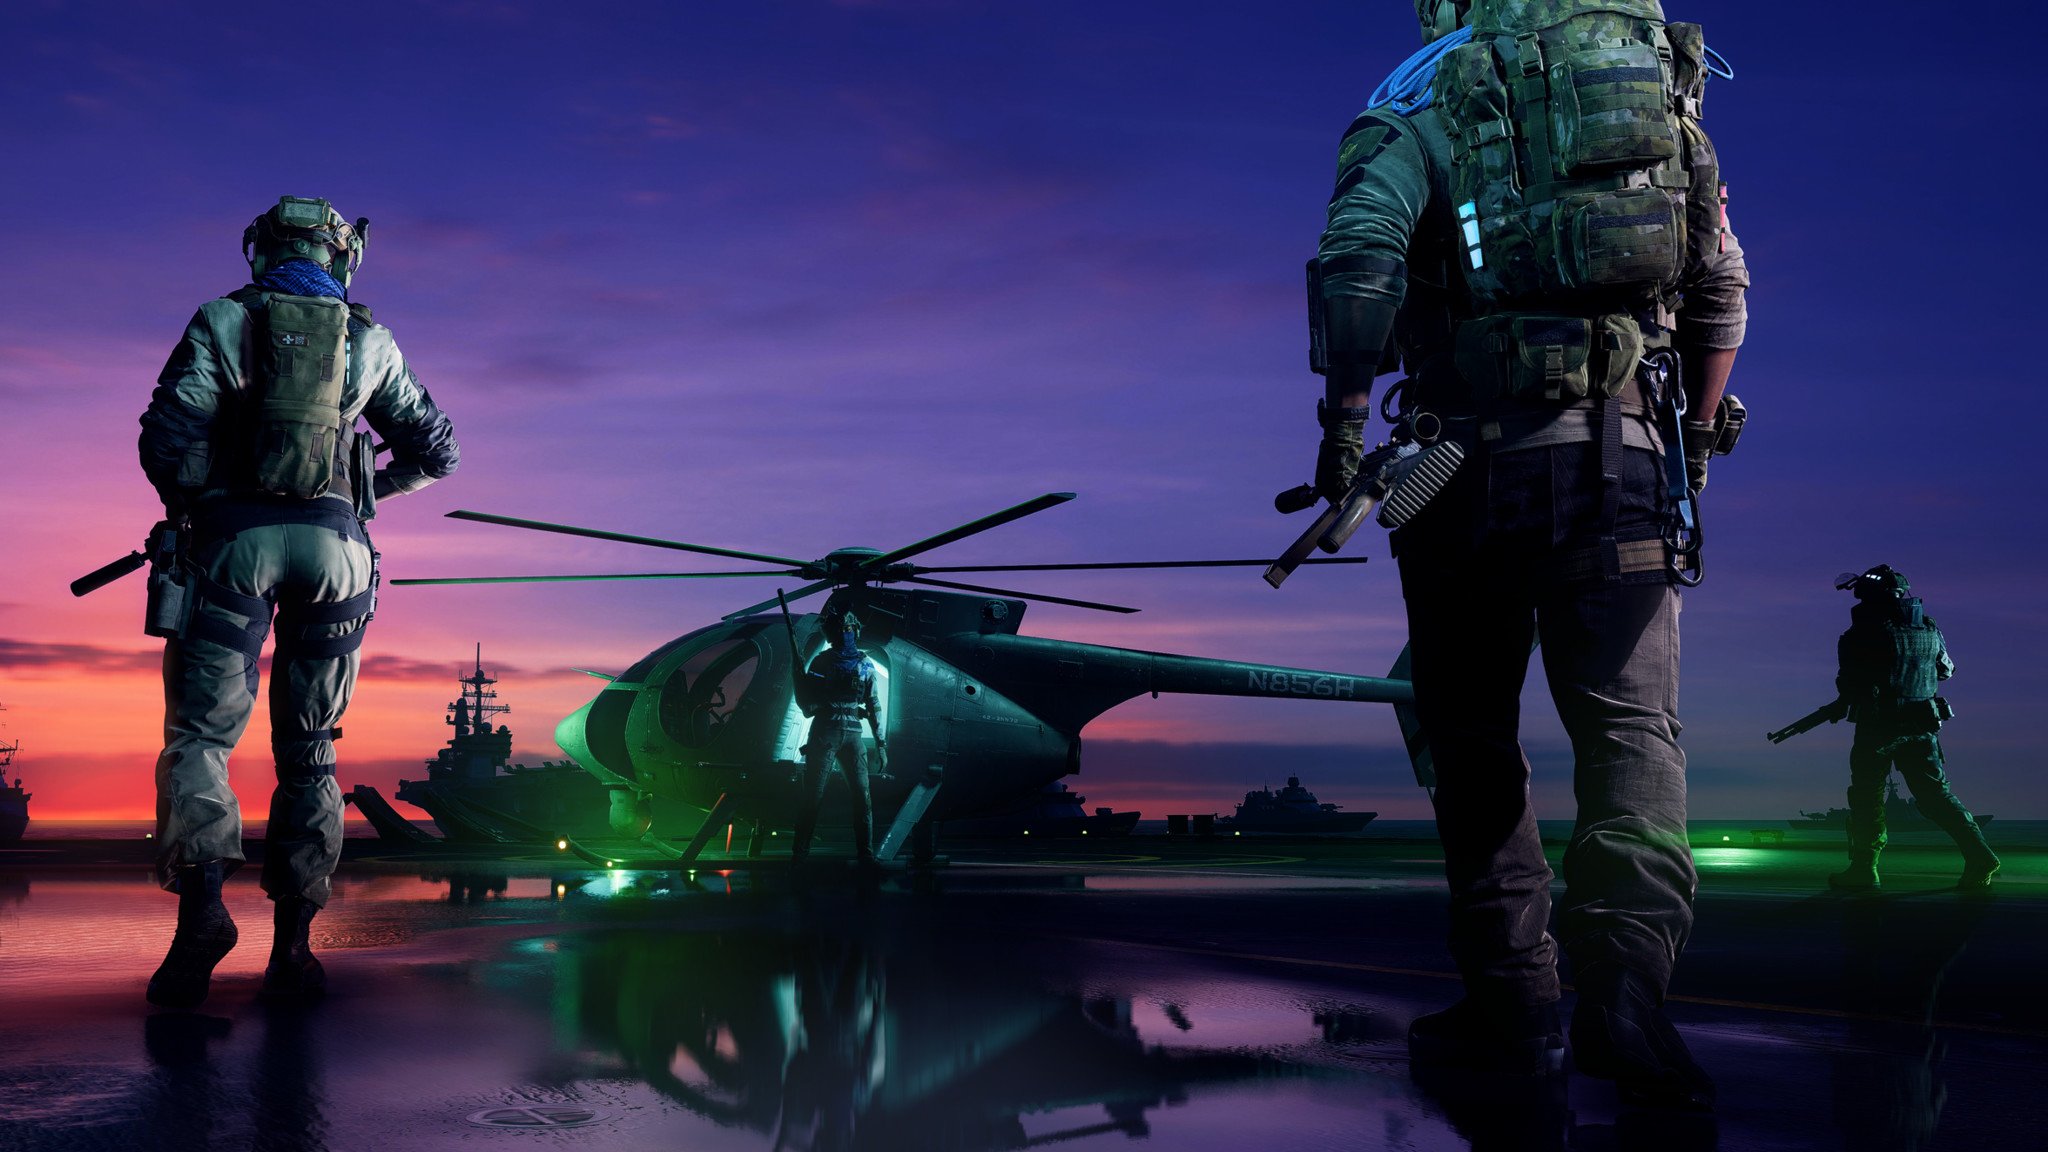 PS4 vs. Xbox One: Battlefield 4 on next-gen consoles closes the